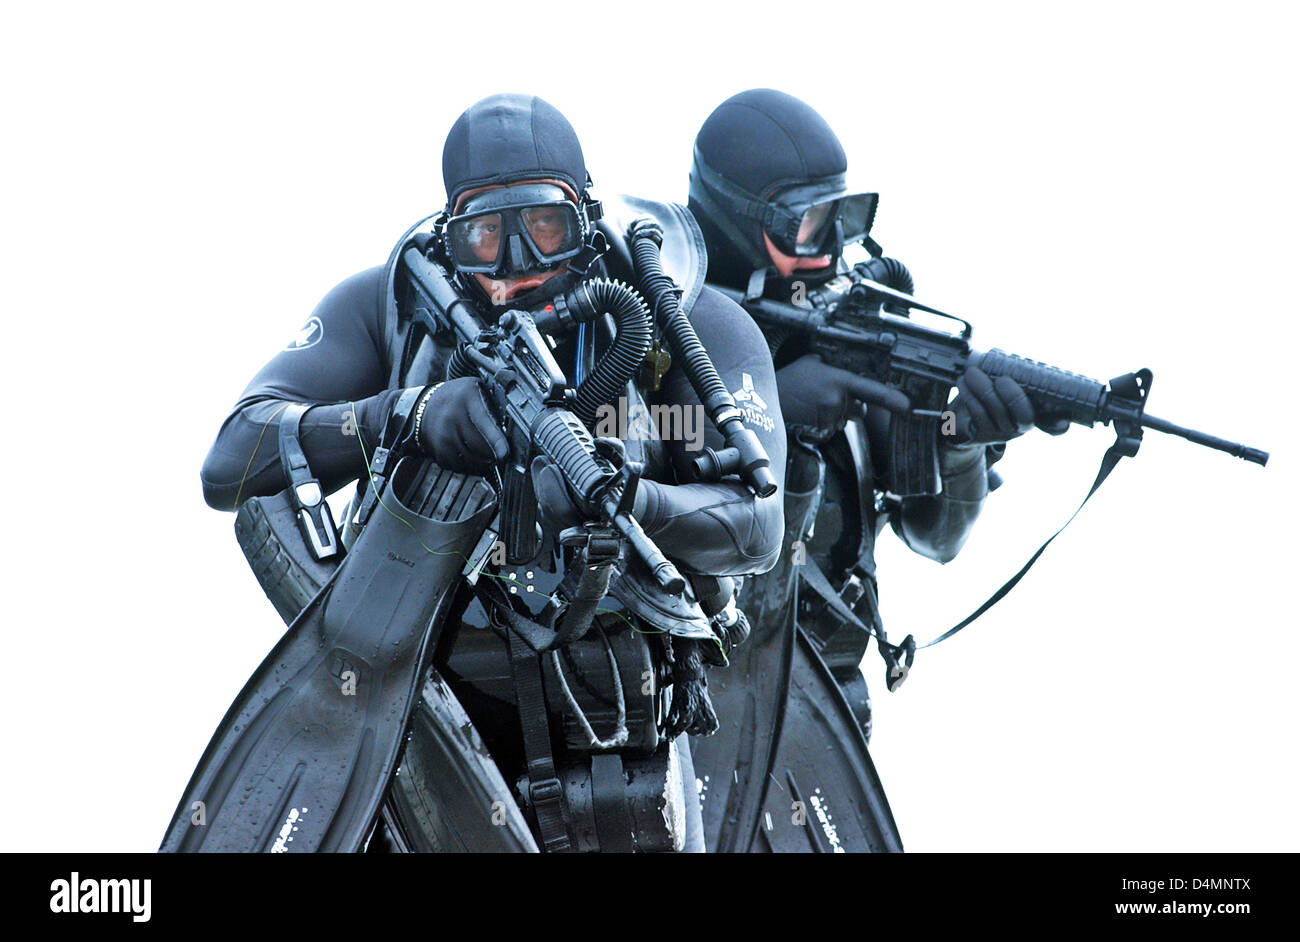 Members of a SEAL Team practice water insertion techniques in SCUBA gear May 25, 2004 at the Navy Special Warfare Center, Coronado, CA. Stock Photo